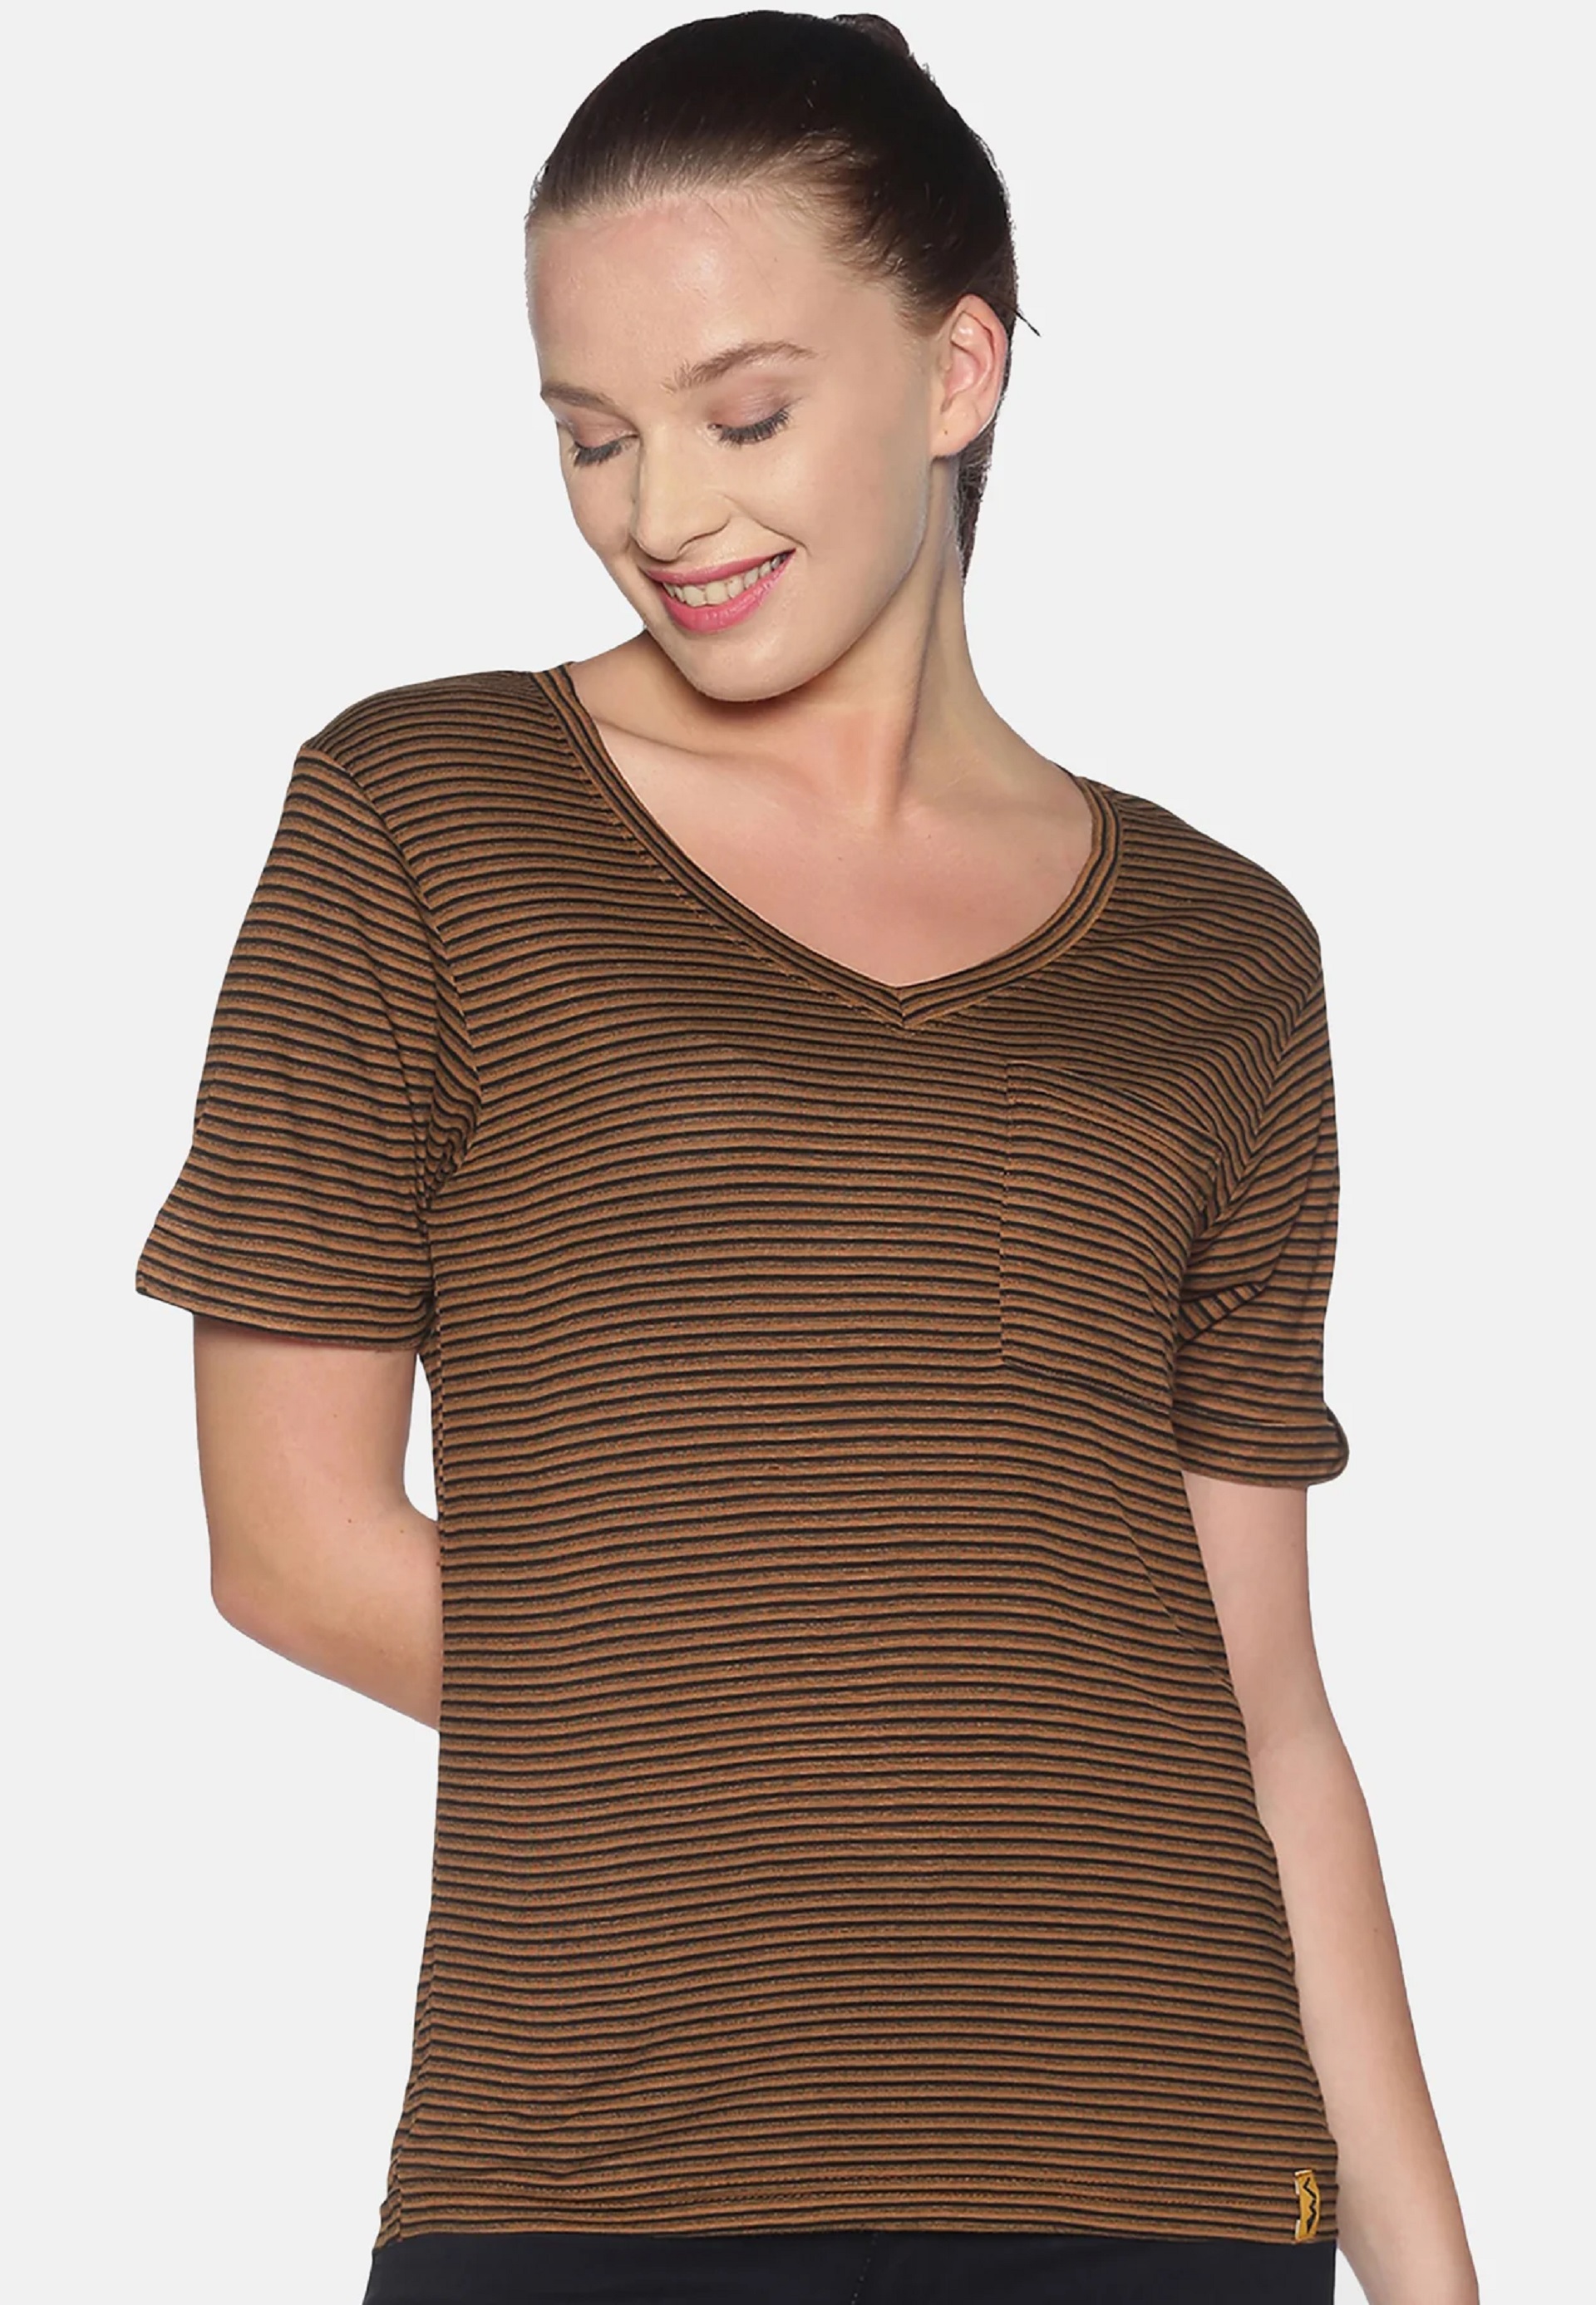 Campus Sutra Women Striped Stylish Brown Color Tops